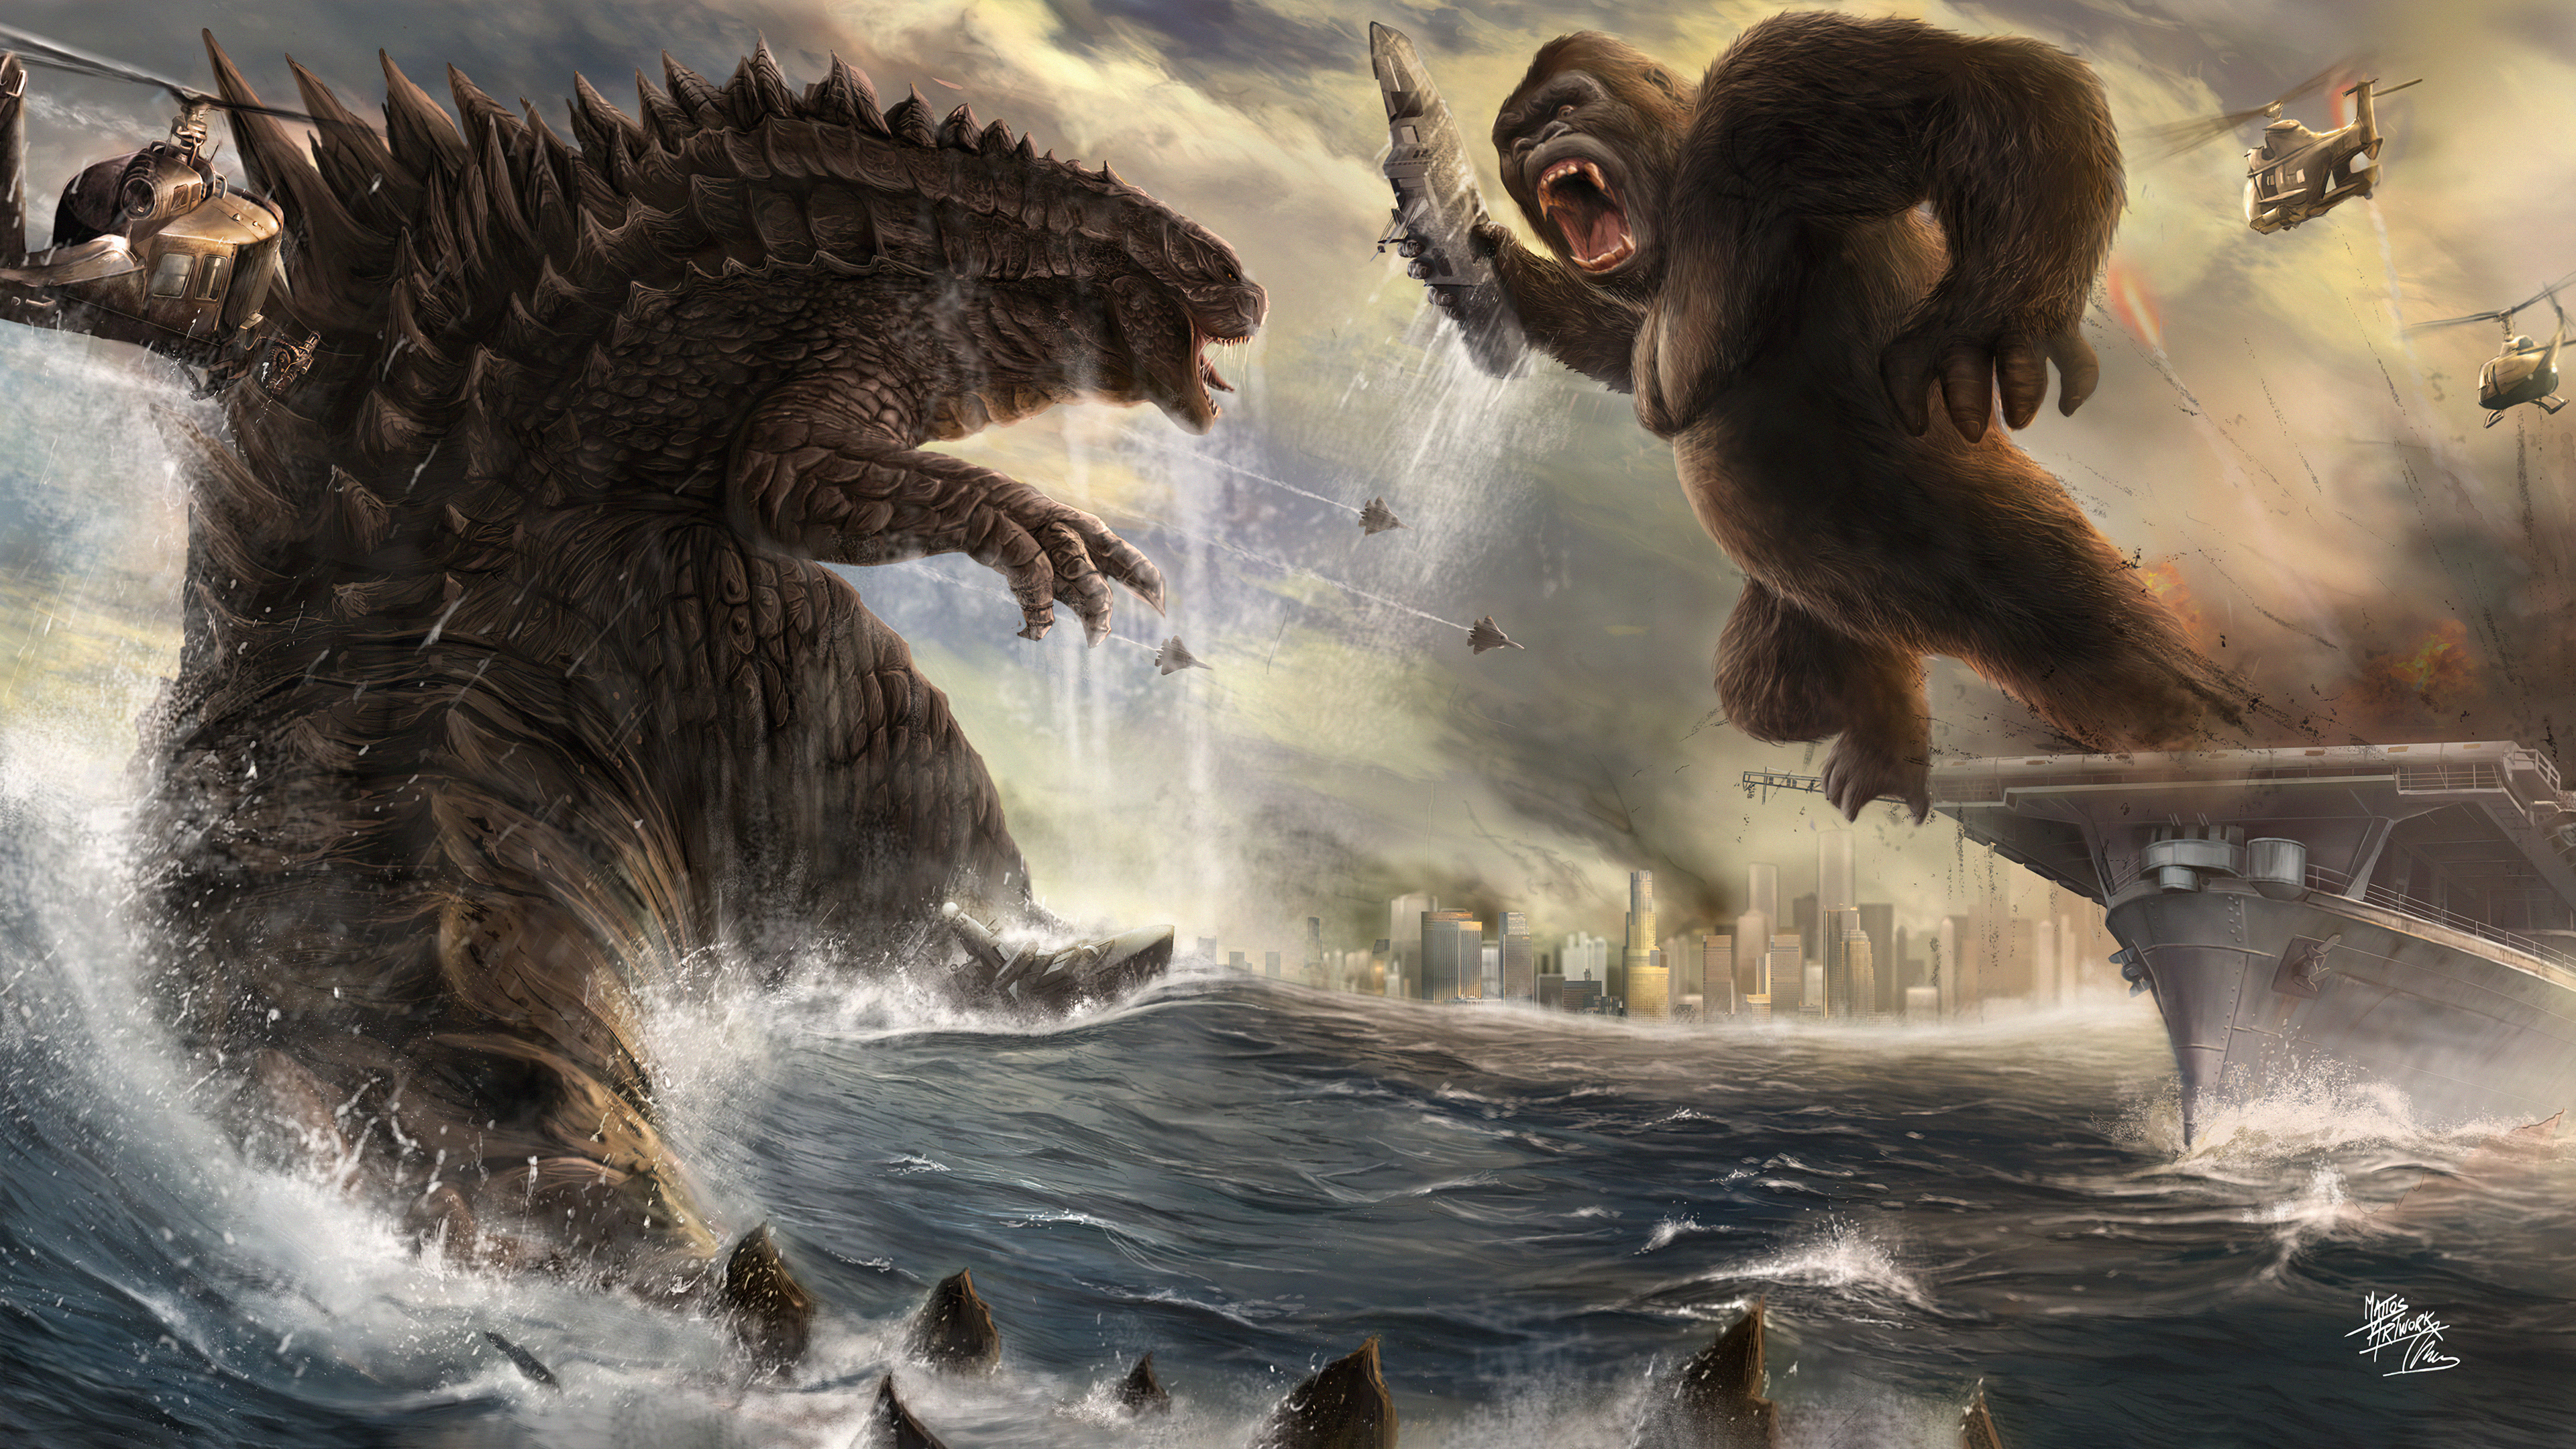 The battle between gozilla and the sea monster